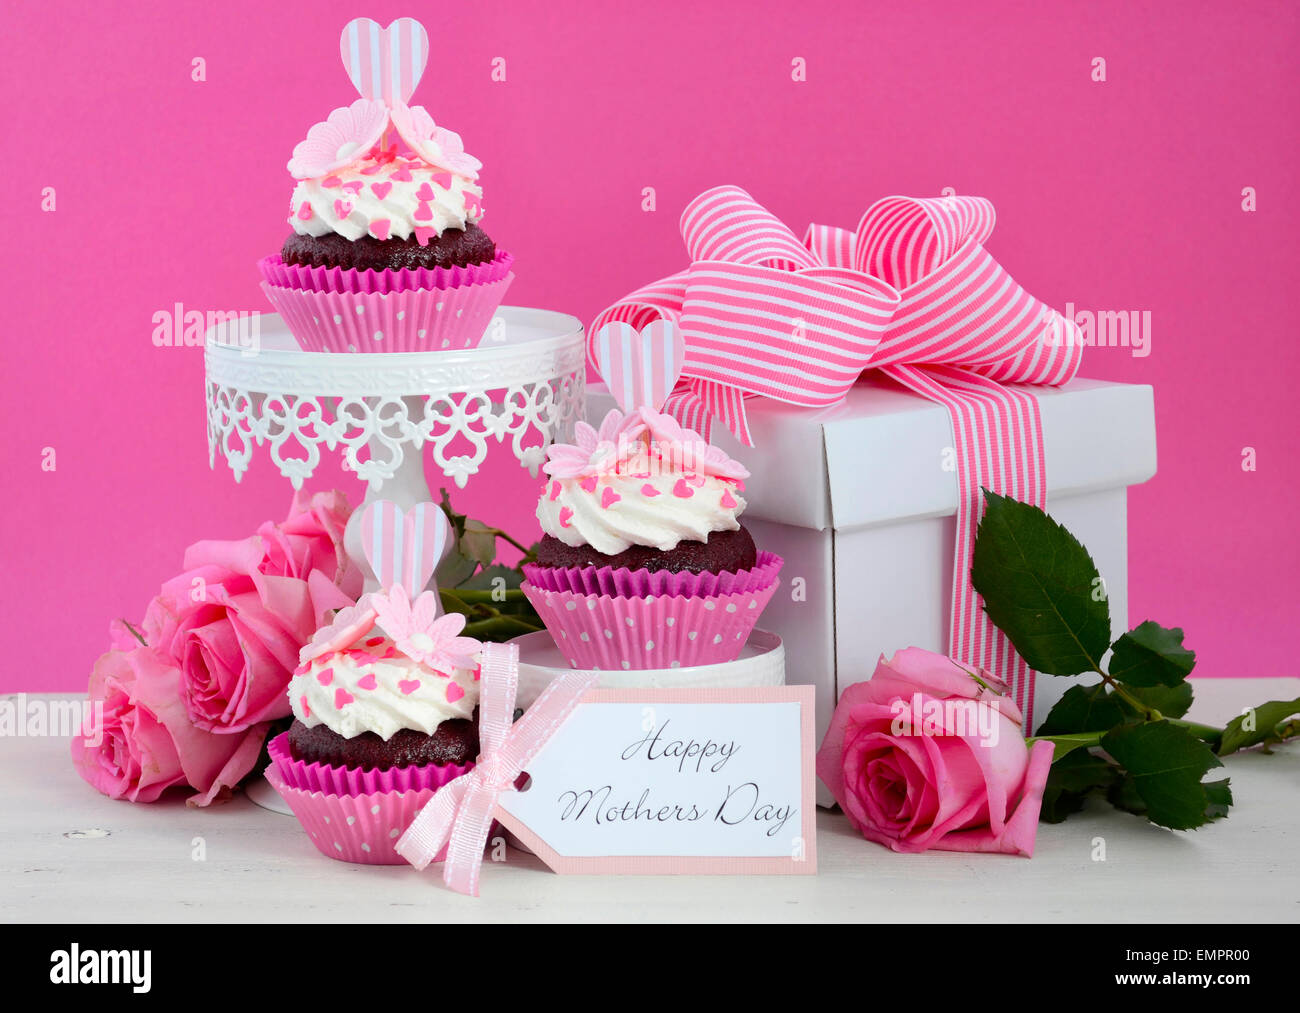 Happy Mothers Day pink and white cupcakes on retro style cake stands and large gift box on vintage white wood table. Stock Photo